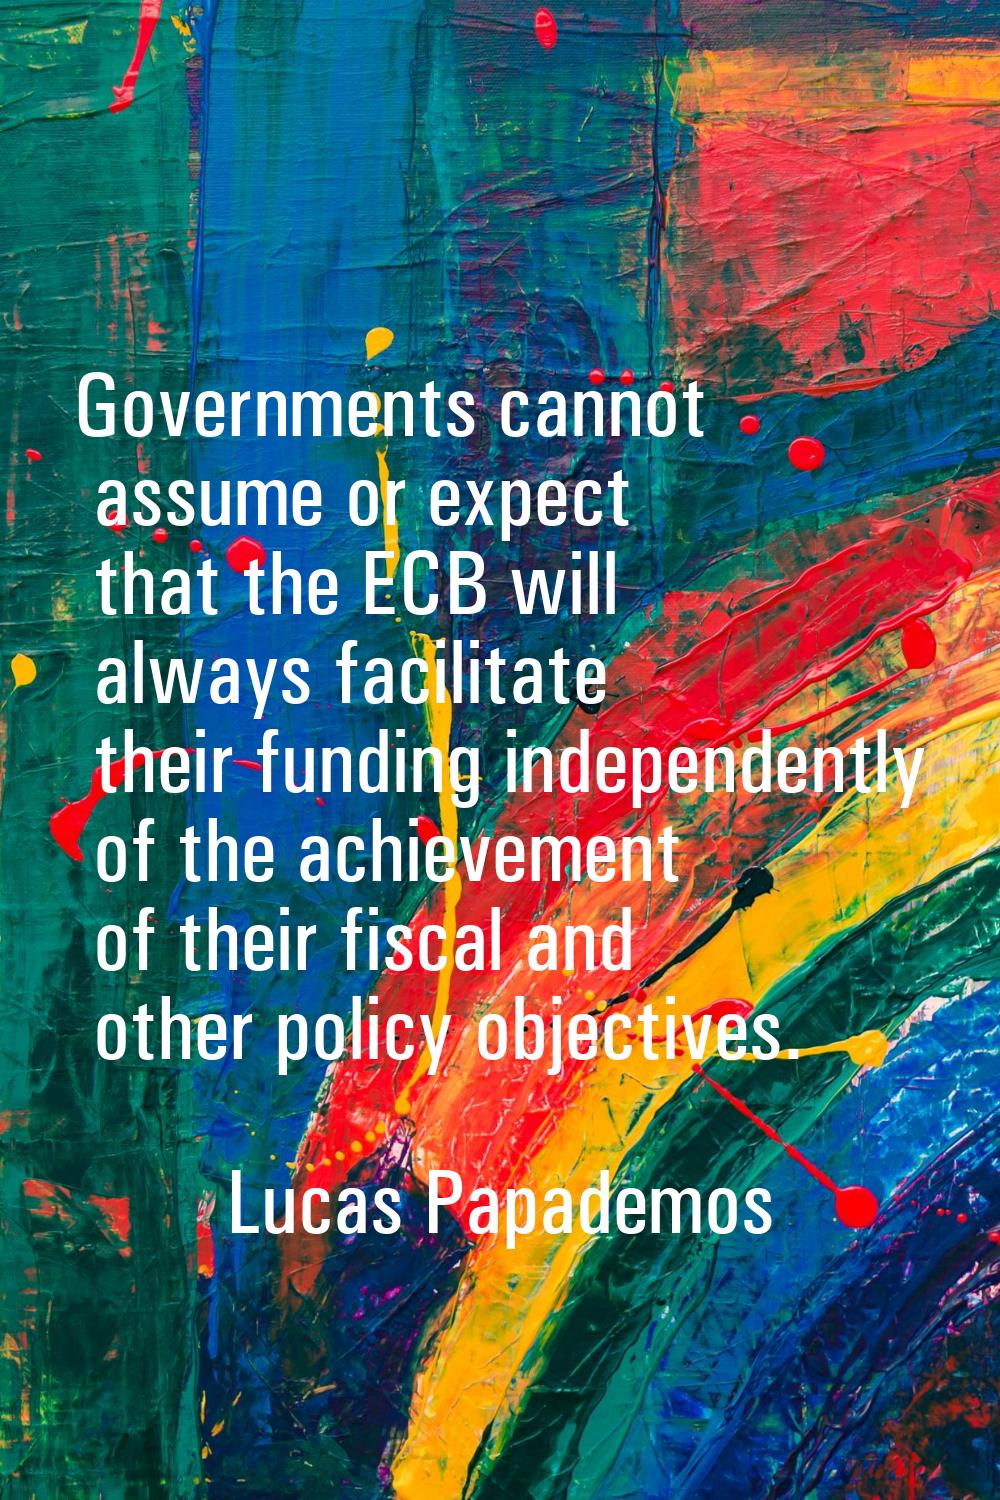 Governments cannot assume or expect that the ECB will always facilitate their funding independently